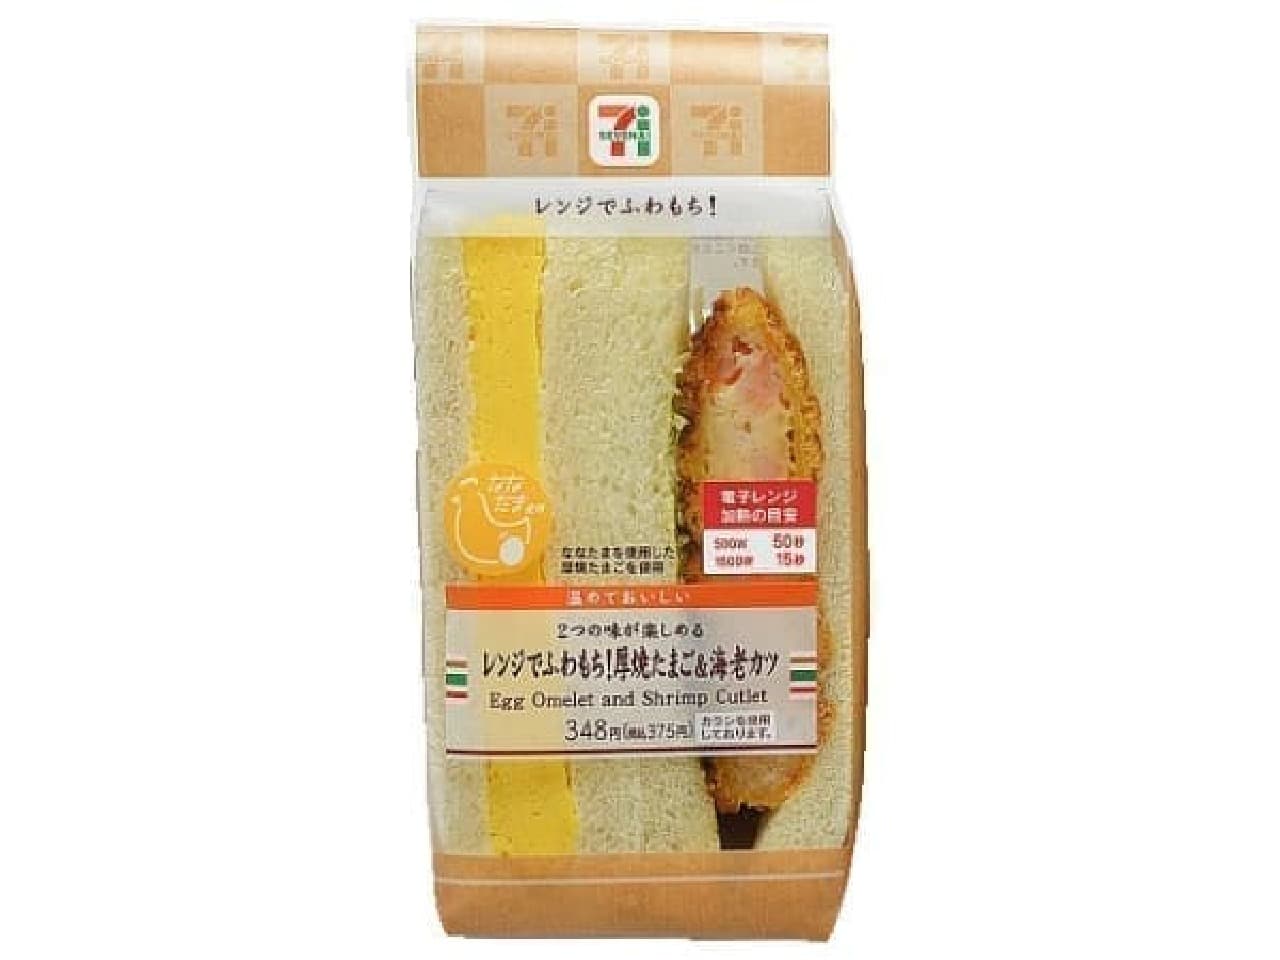 7-ELEVEN "Fluffy rice cake in the microwave! Thick roasted egg & shrimp cutlet"